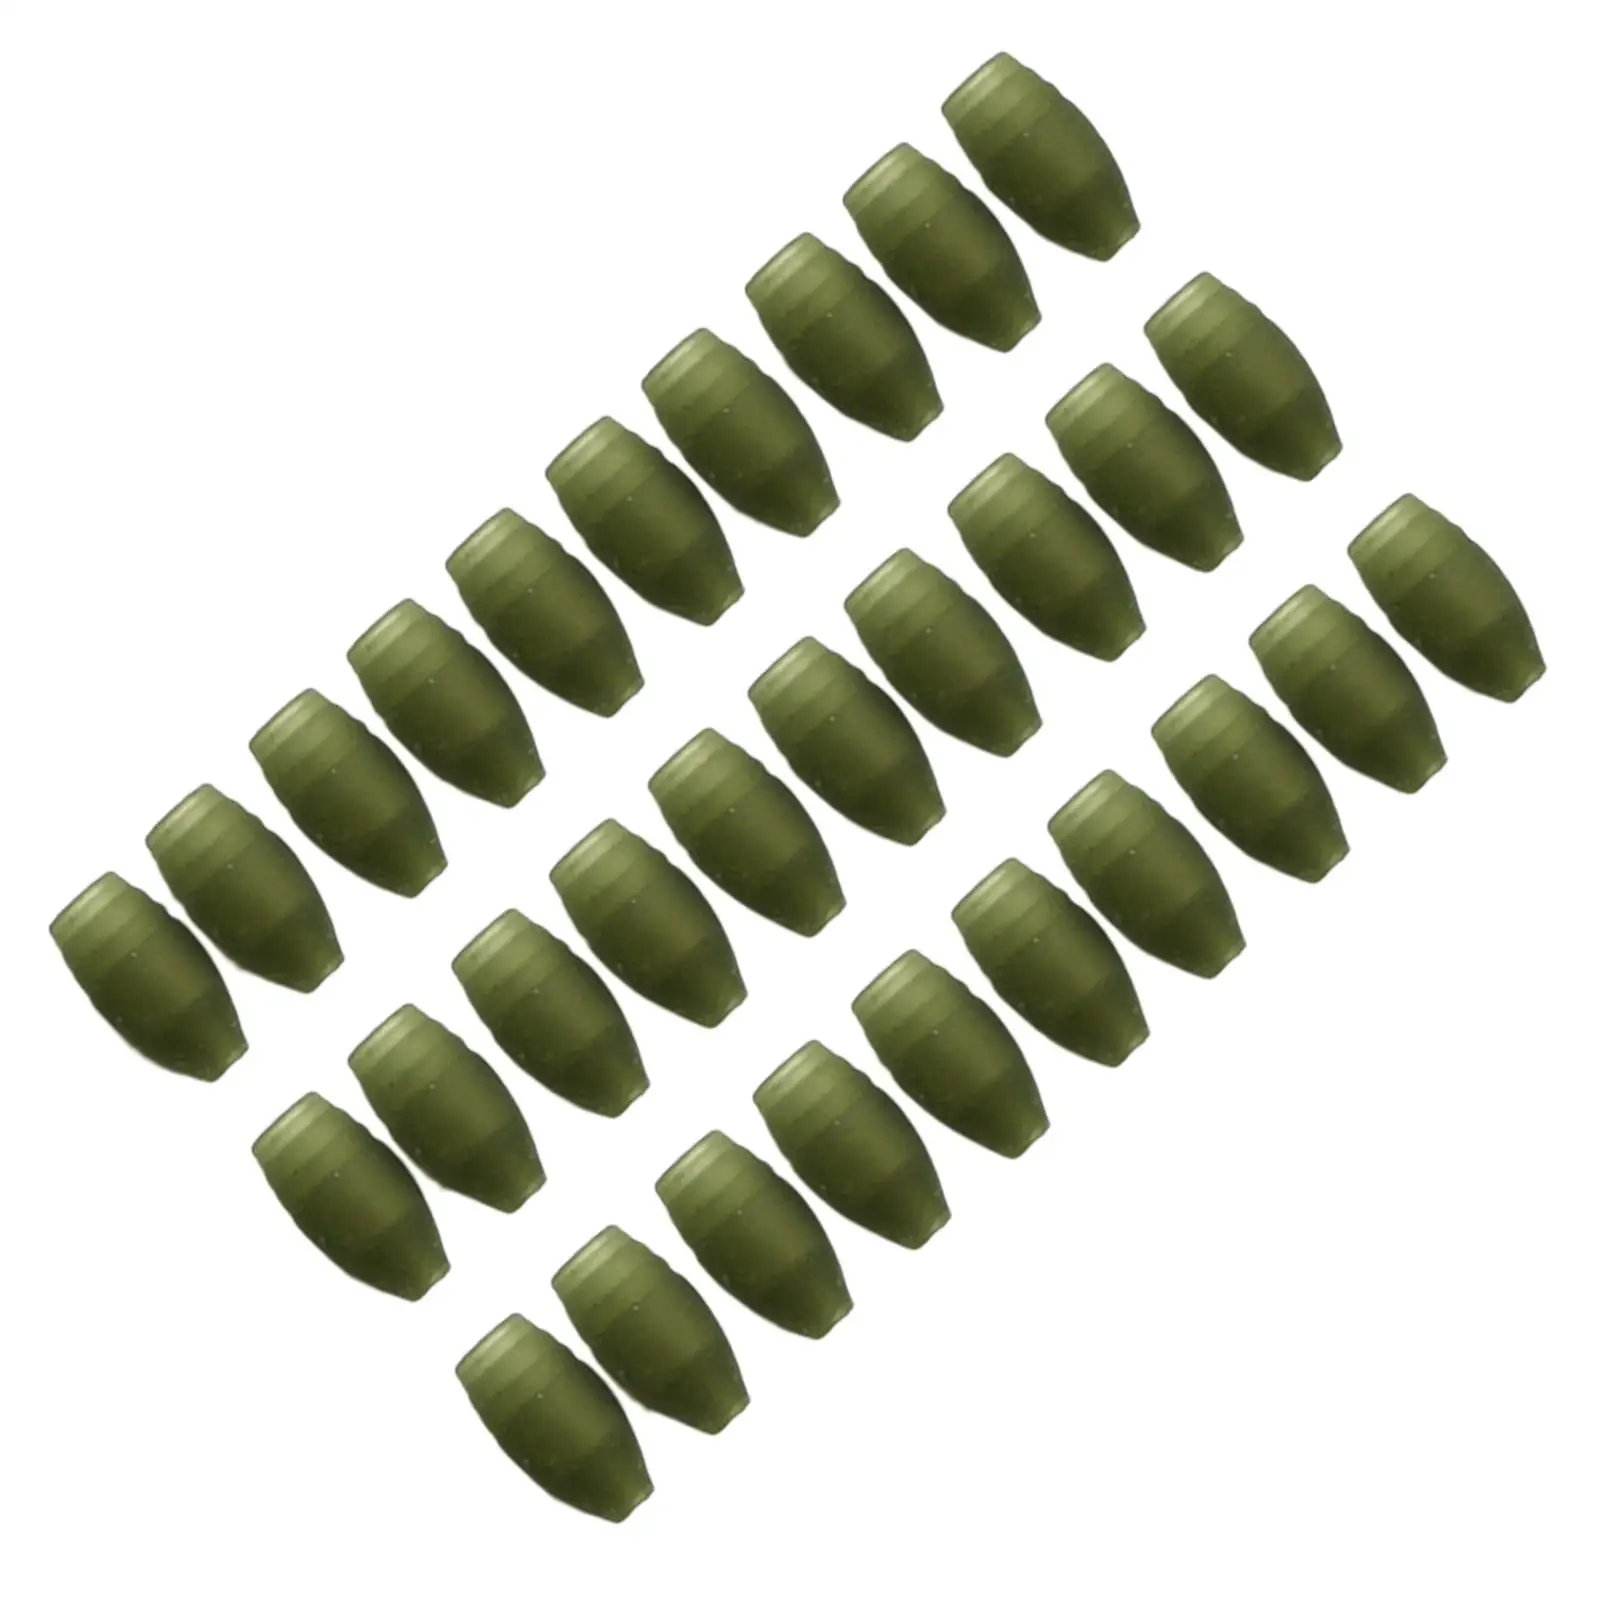 30x Elastic Dacron Connectors Carp Fishing Accessories Tool for Solid and Hollow Fishing Tackle Rigs Coarse Stop Bead Pole Tip